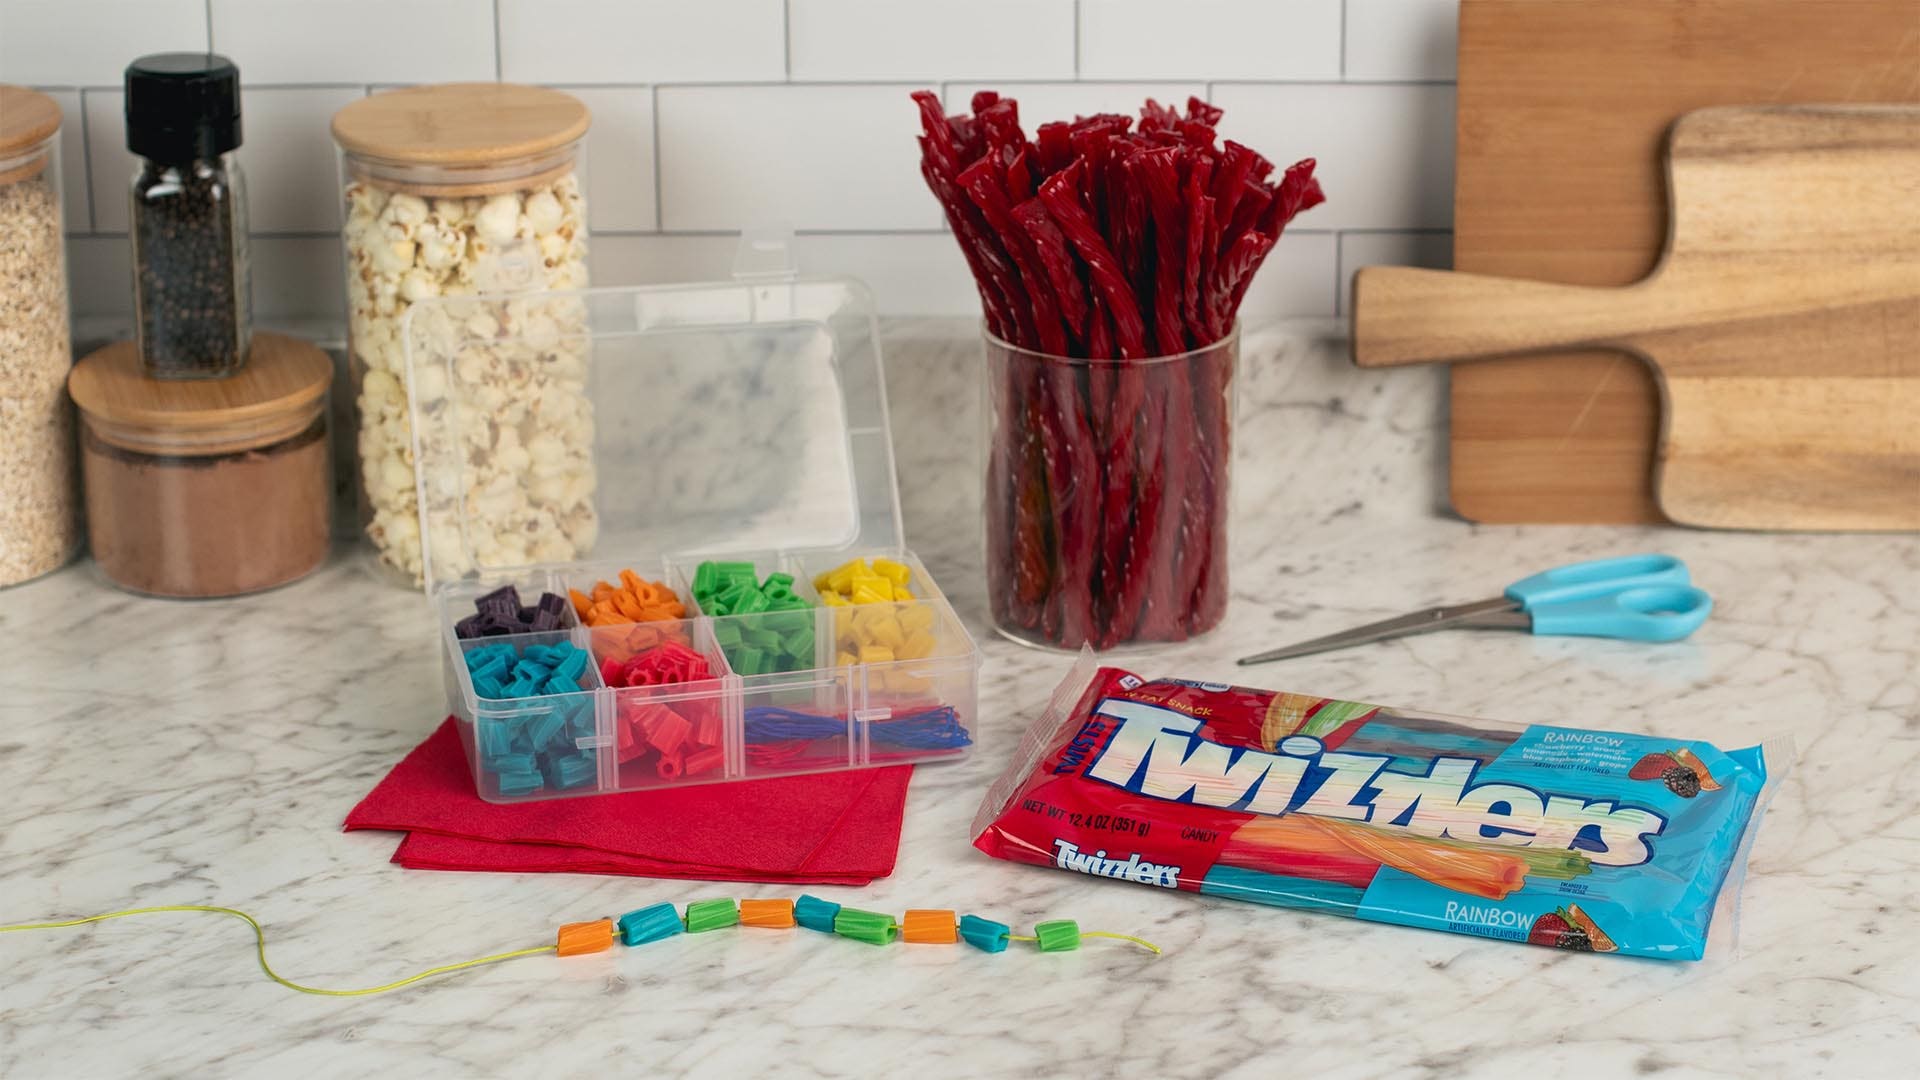 clear jewelry box filled with twizzlers rainbow candy cut into small pieces